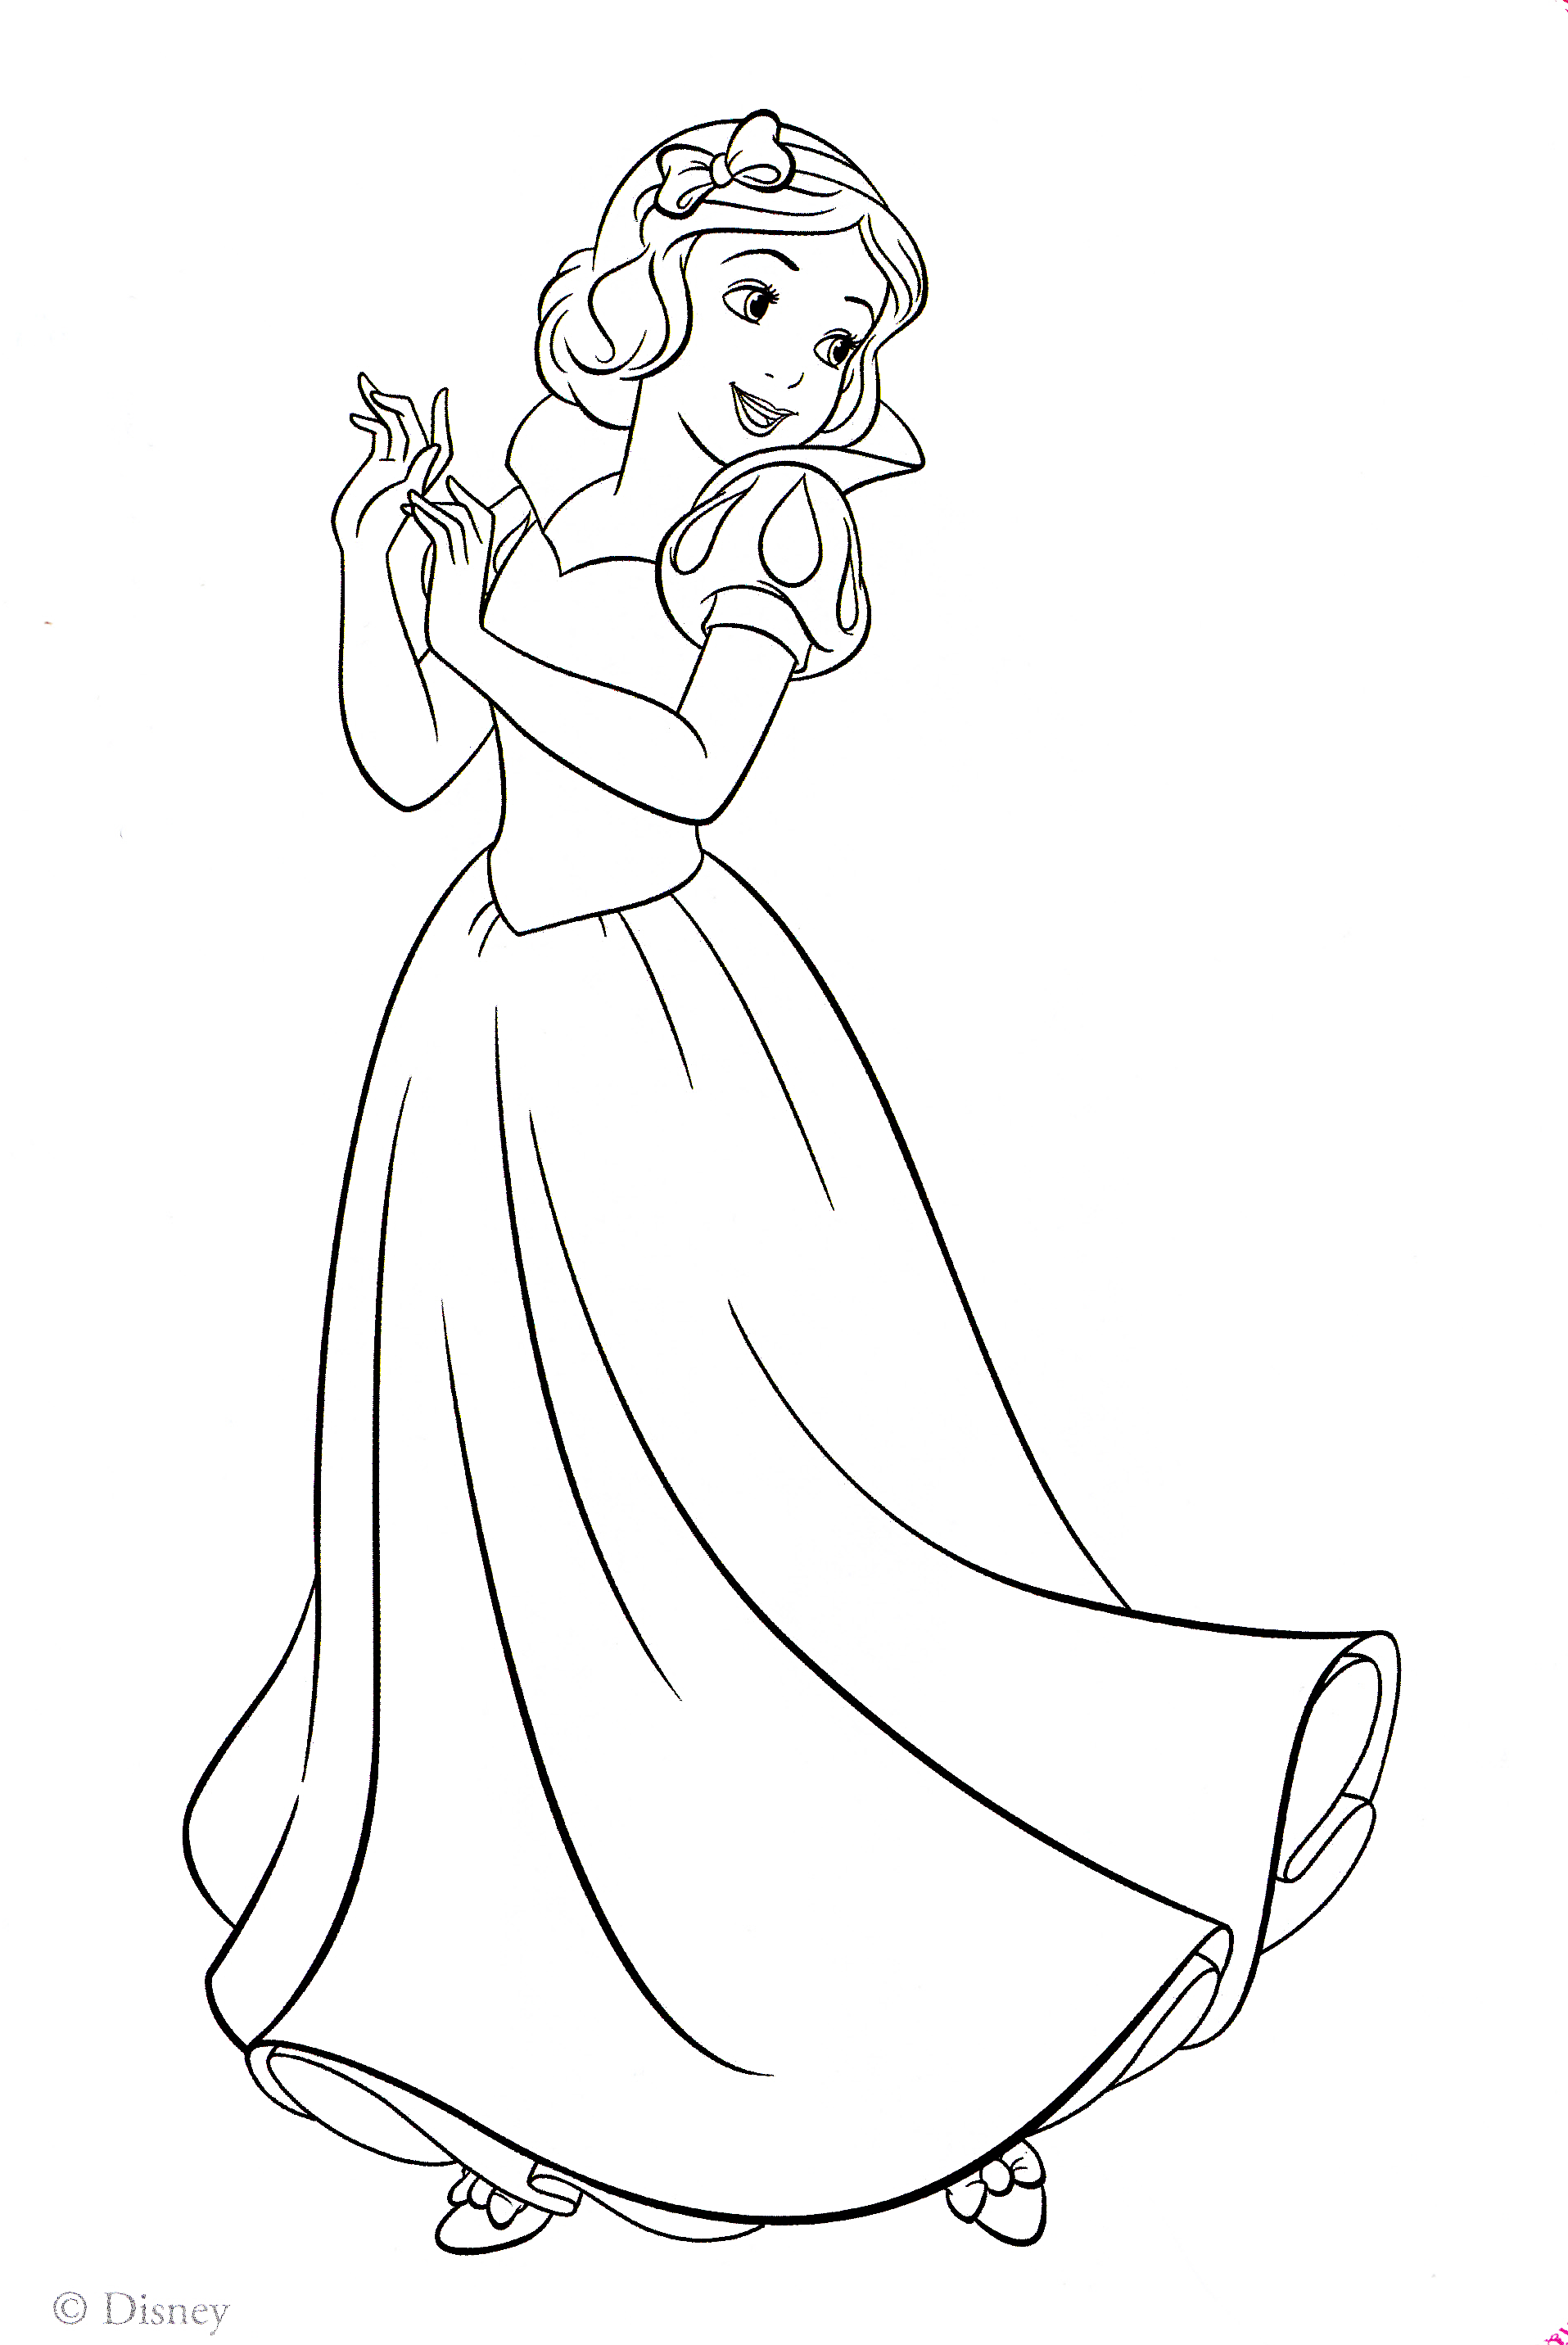 Coloring Pages Of Snow White - Coloring Page - Coloring Home